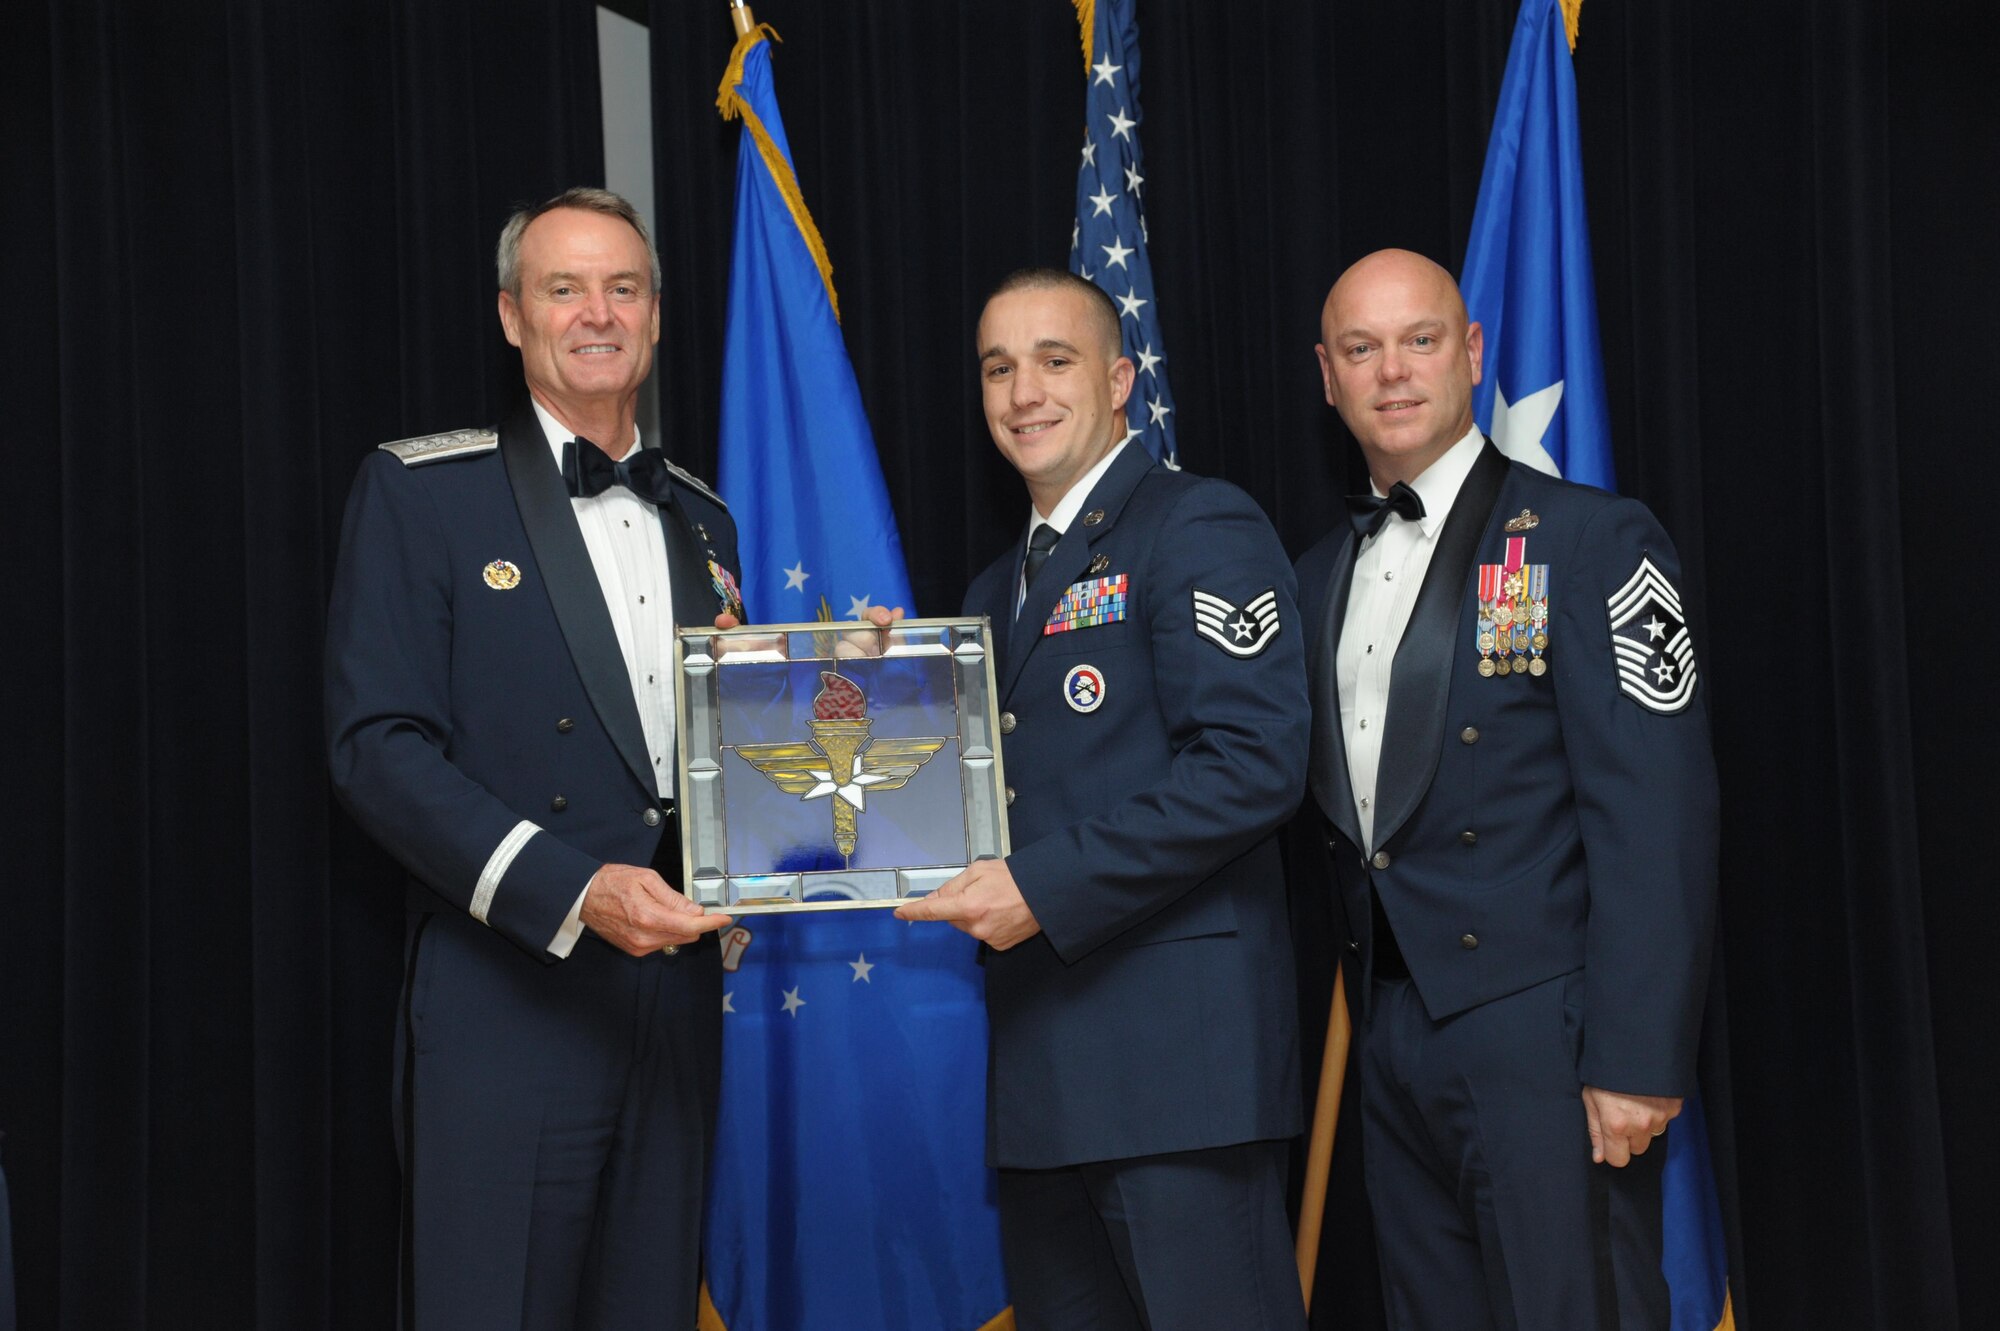 Staff Sgt. Richard Bates, 47th Flying Training Wing, Laughlin Air Force Base, Texas, receives an award from Lt. Gen. Darryl Roberson, commander, Air Education and Training Command and AETC Command Chief Master Sgt. David Staton during a ceremony here, June 16. Bates was selected as the AETC Honor Guard Program Manager of the Year. (U.S. Air Force photo by Joel Martinez)